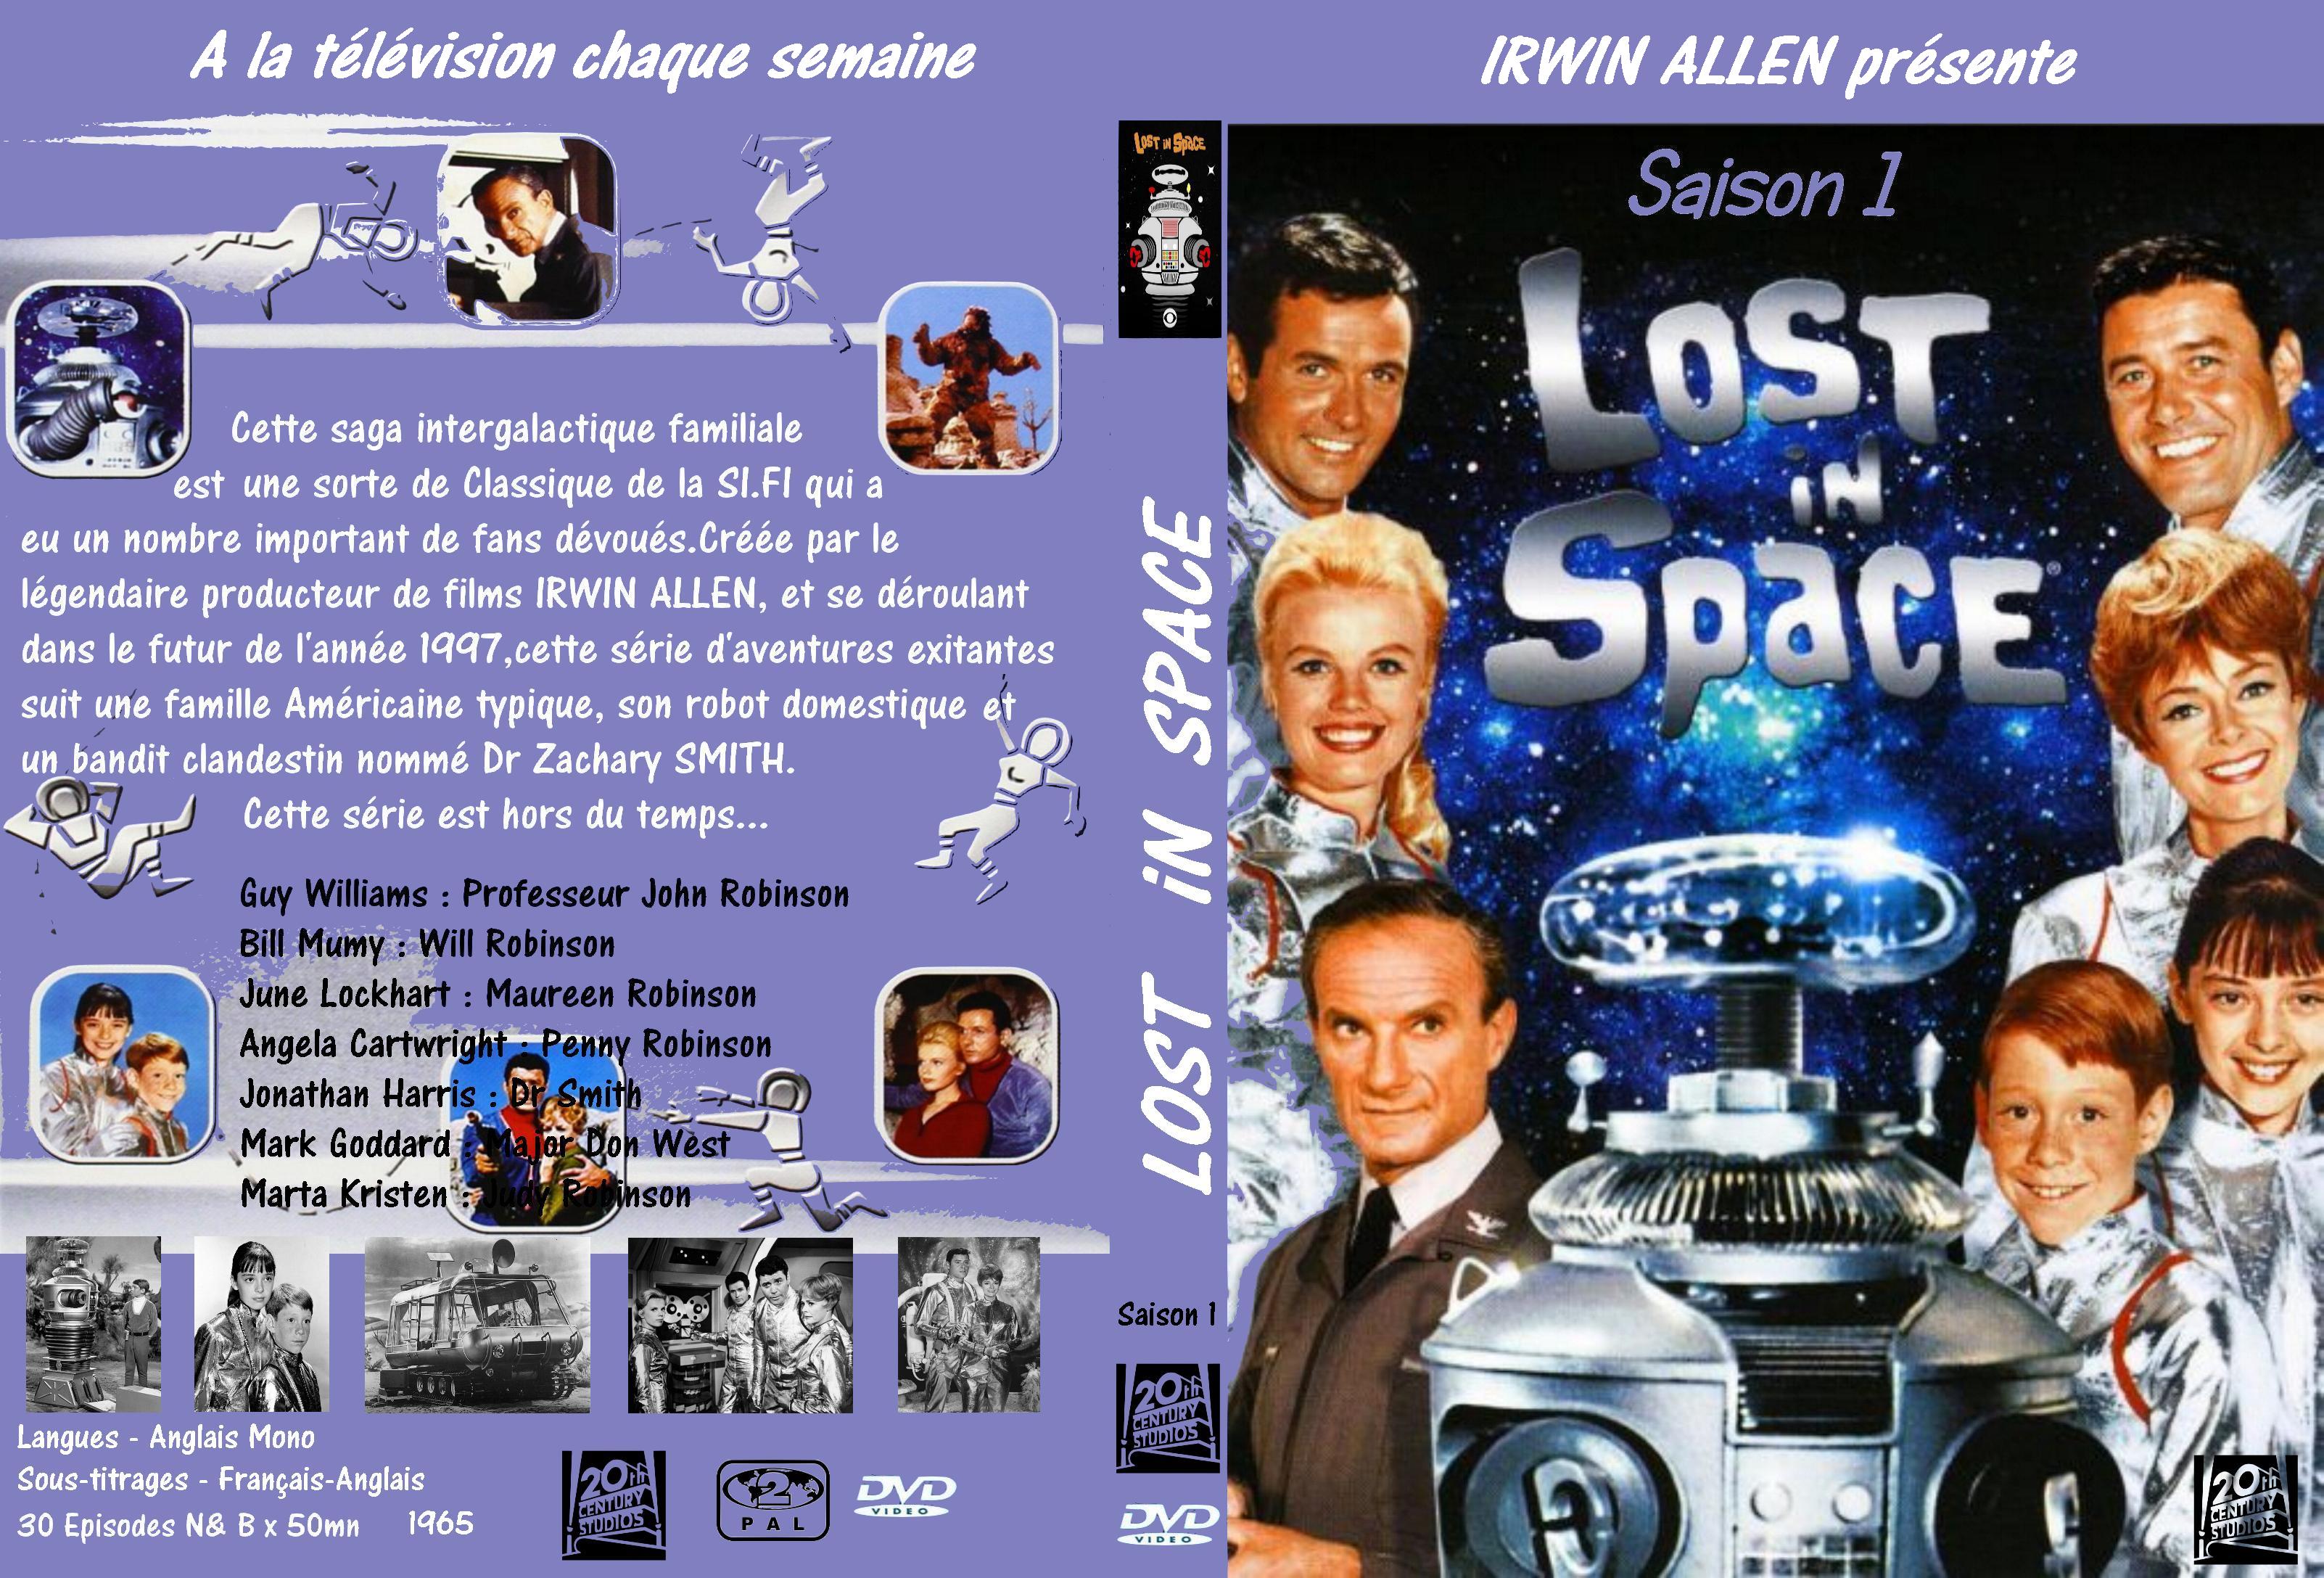 Jaquette DVD Lost in Space saison 1 custom